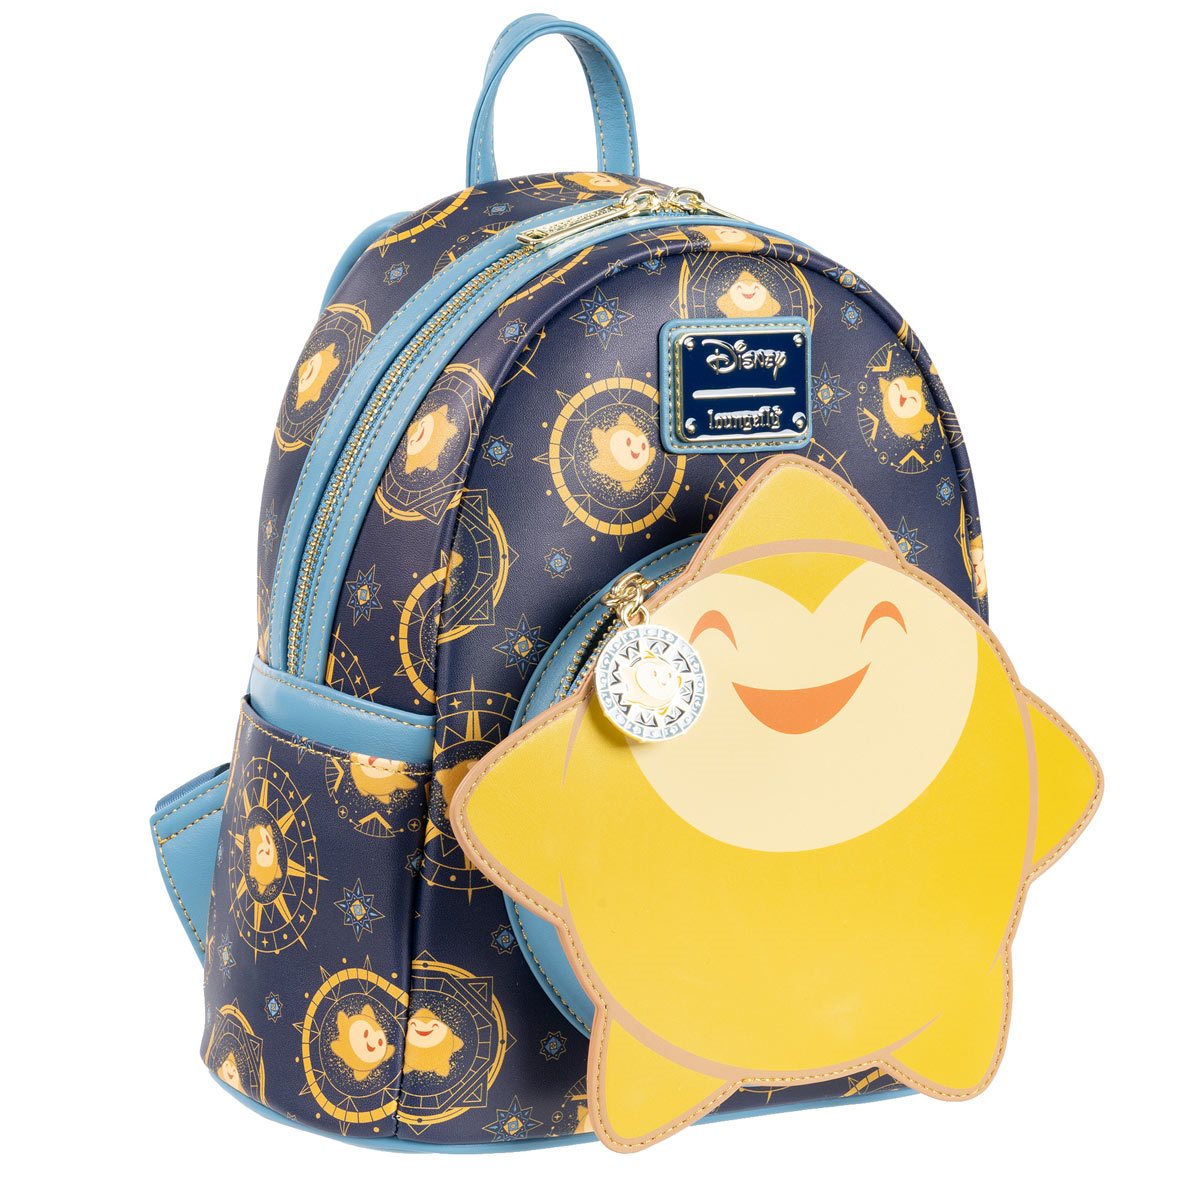 Loungefly Entertainment Earth Exclusive Disney Wish Star Glow-in-the-Dark  Mini-Backpack